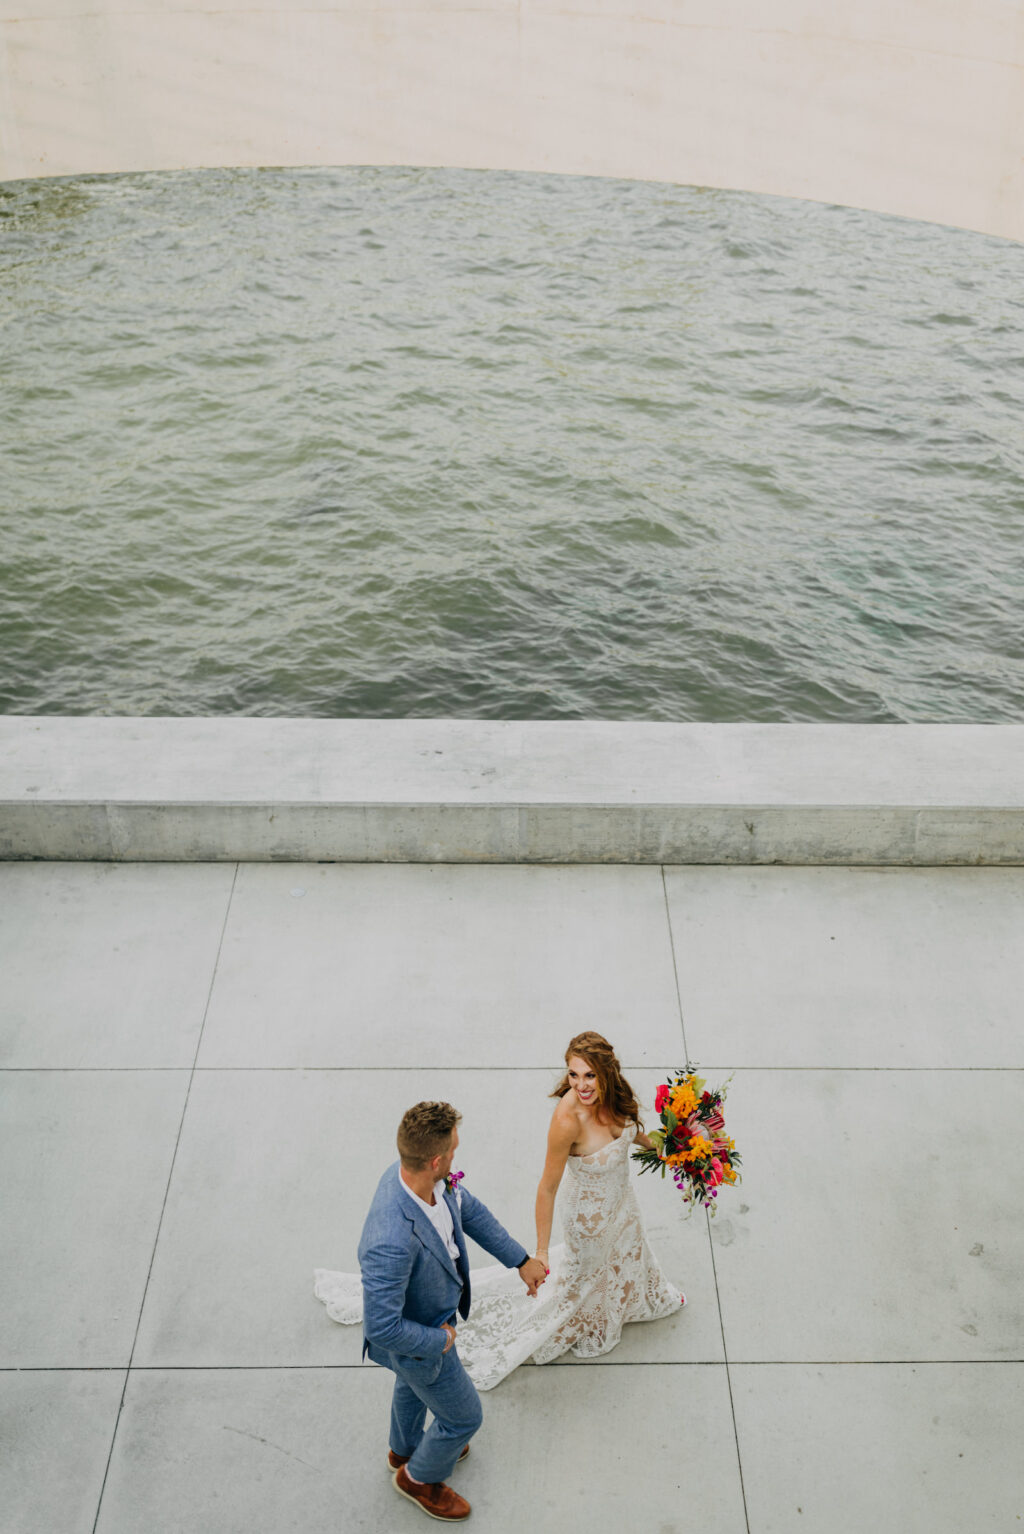 Florida Bride and Groom Holding Hands Waterfront From Above Wedding Photo | Tampa Bay Wedding Photographer Amber McWhorter Photography